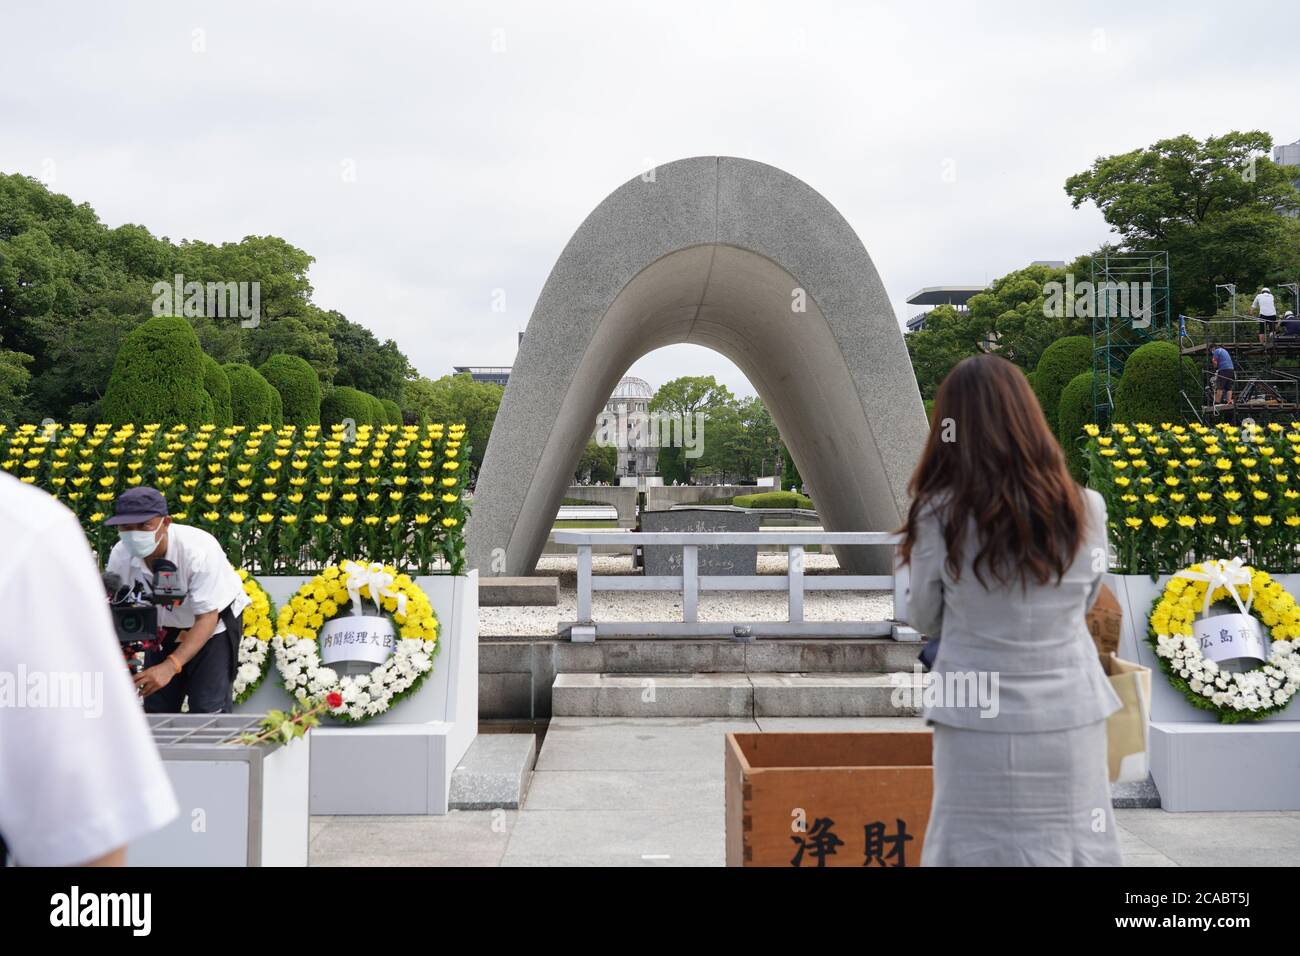 People praying at the Hiroshima Peace Memorial Ceremony.Hiroshima marks the 75th anniversary of the U.S. atomic bombing which killed about 150,000 people and destroyed the entire city during World War II. Stock Photo